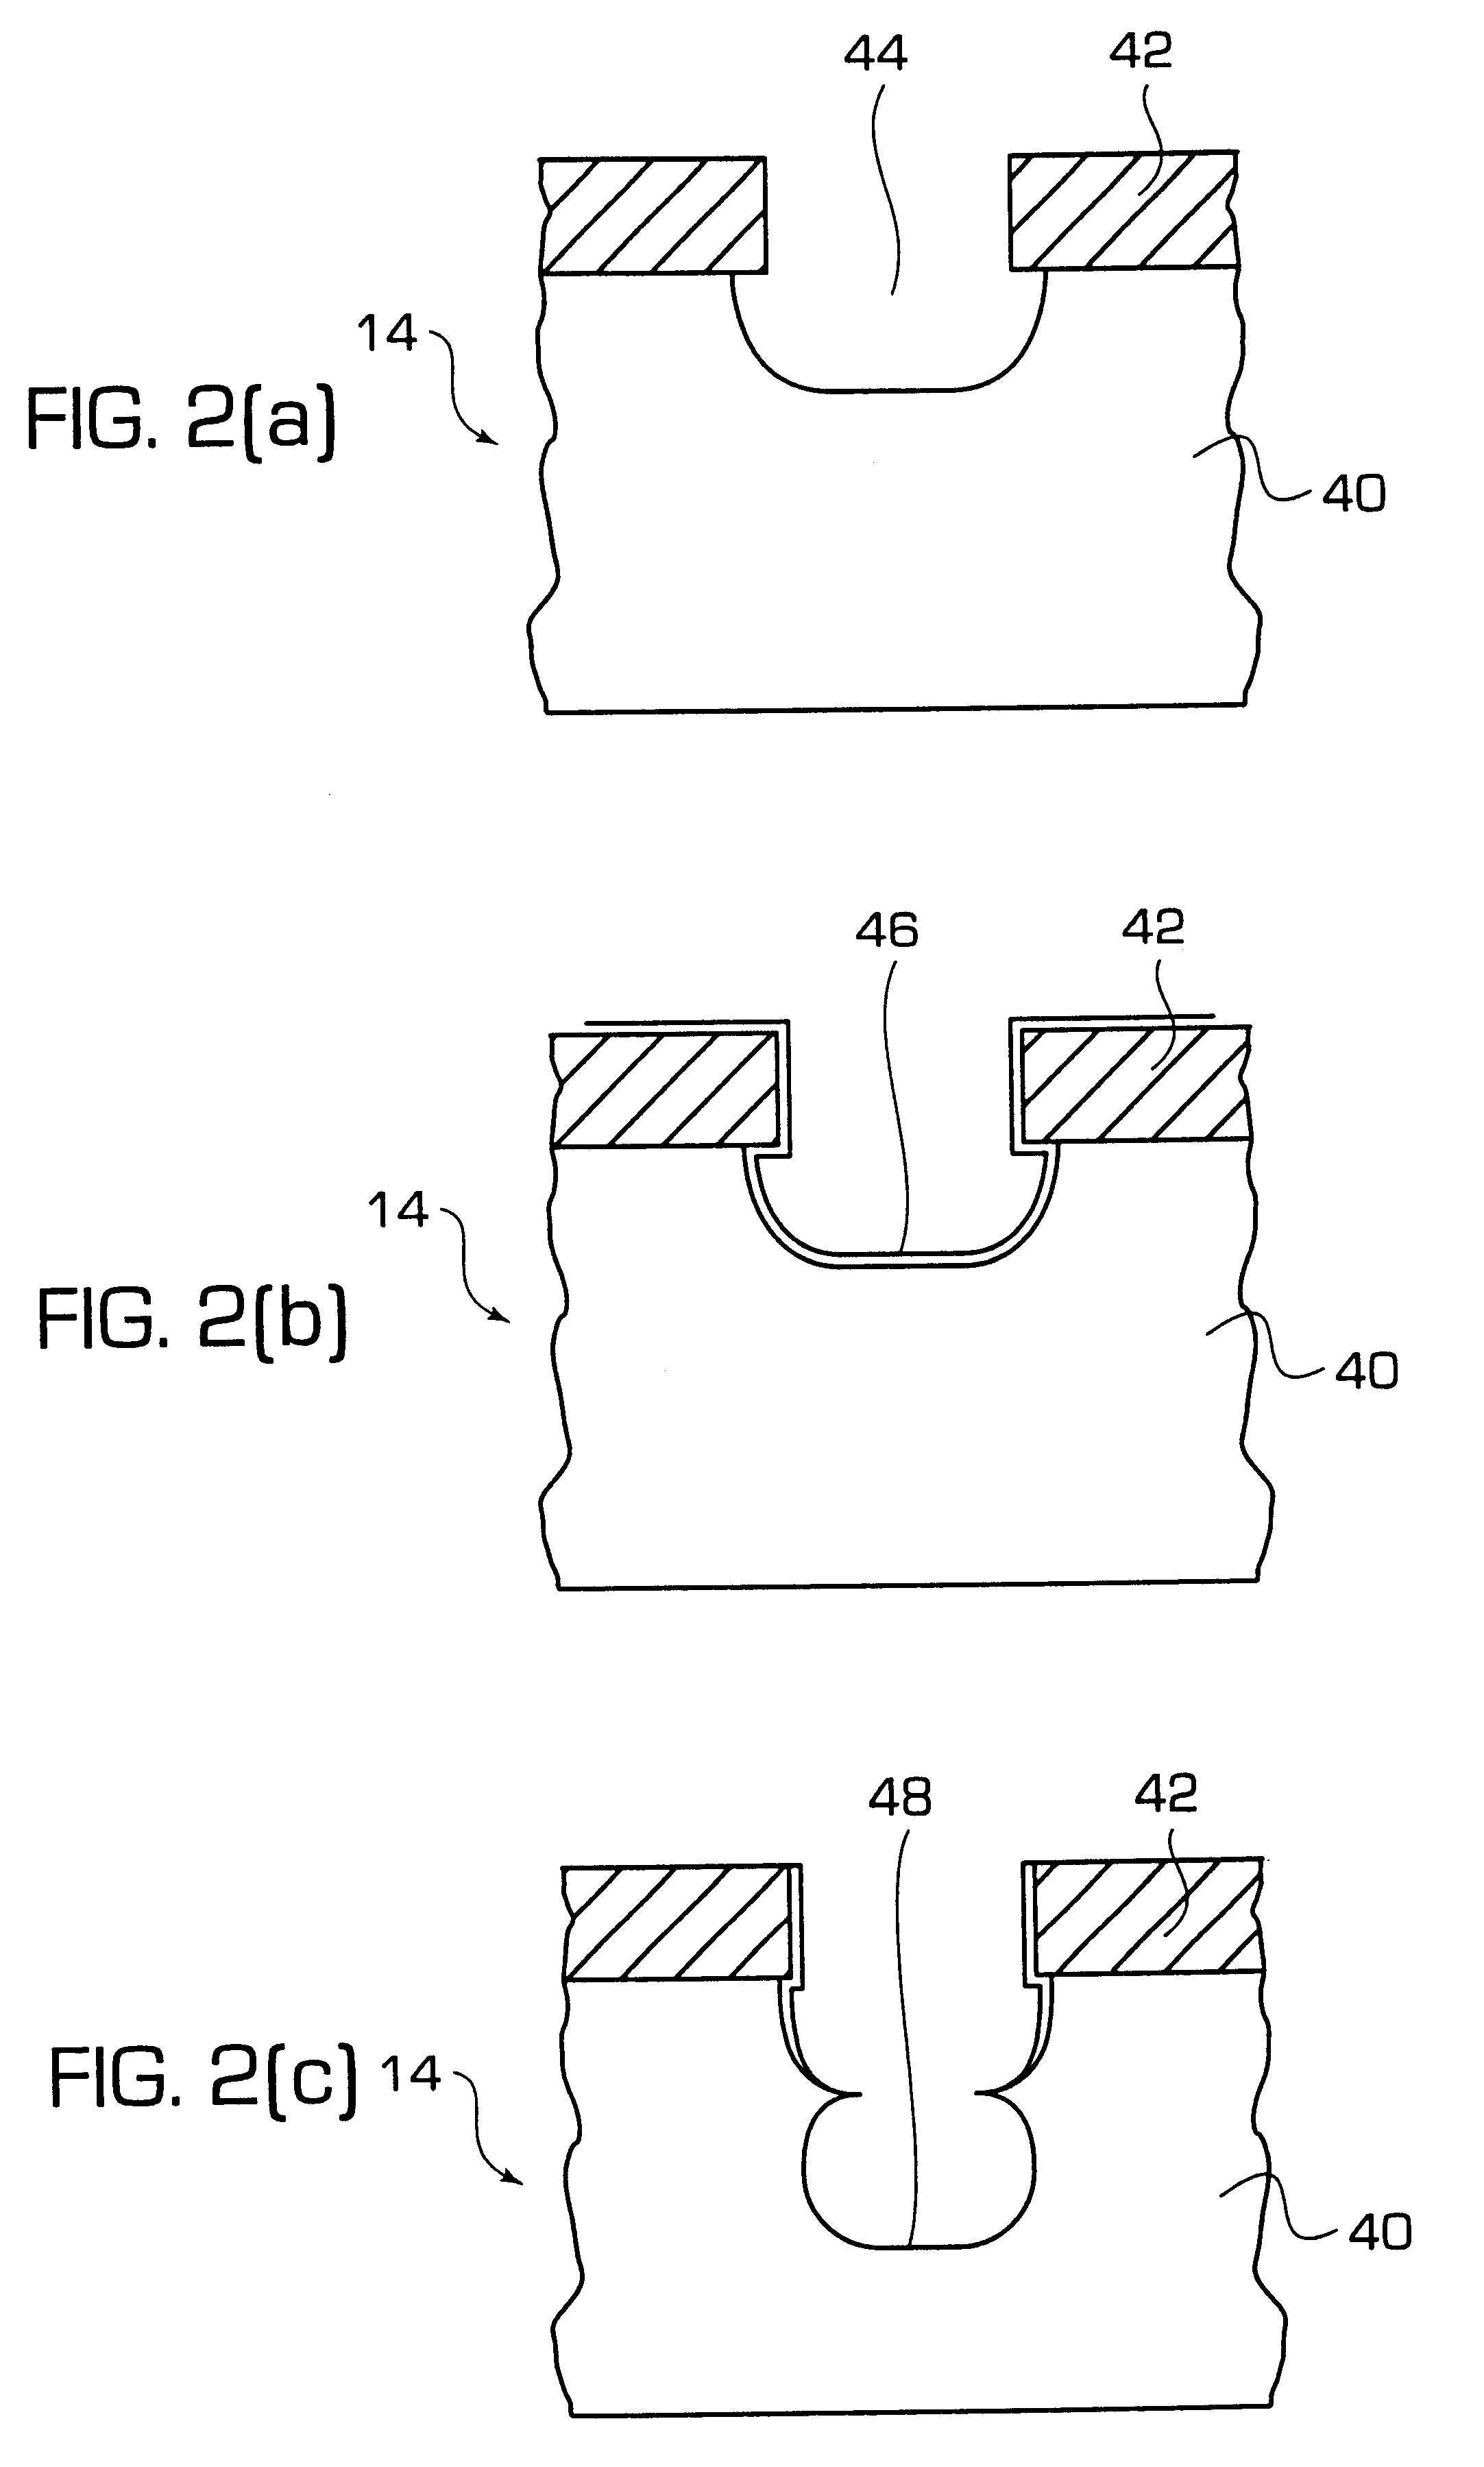 Method of anisotropic etching of substrates